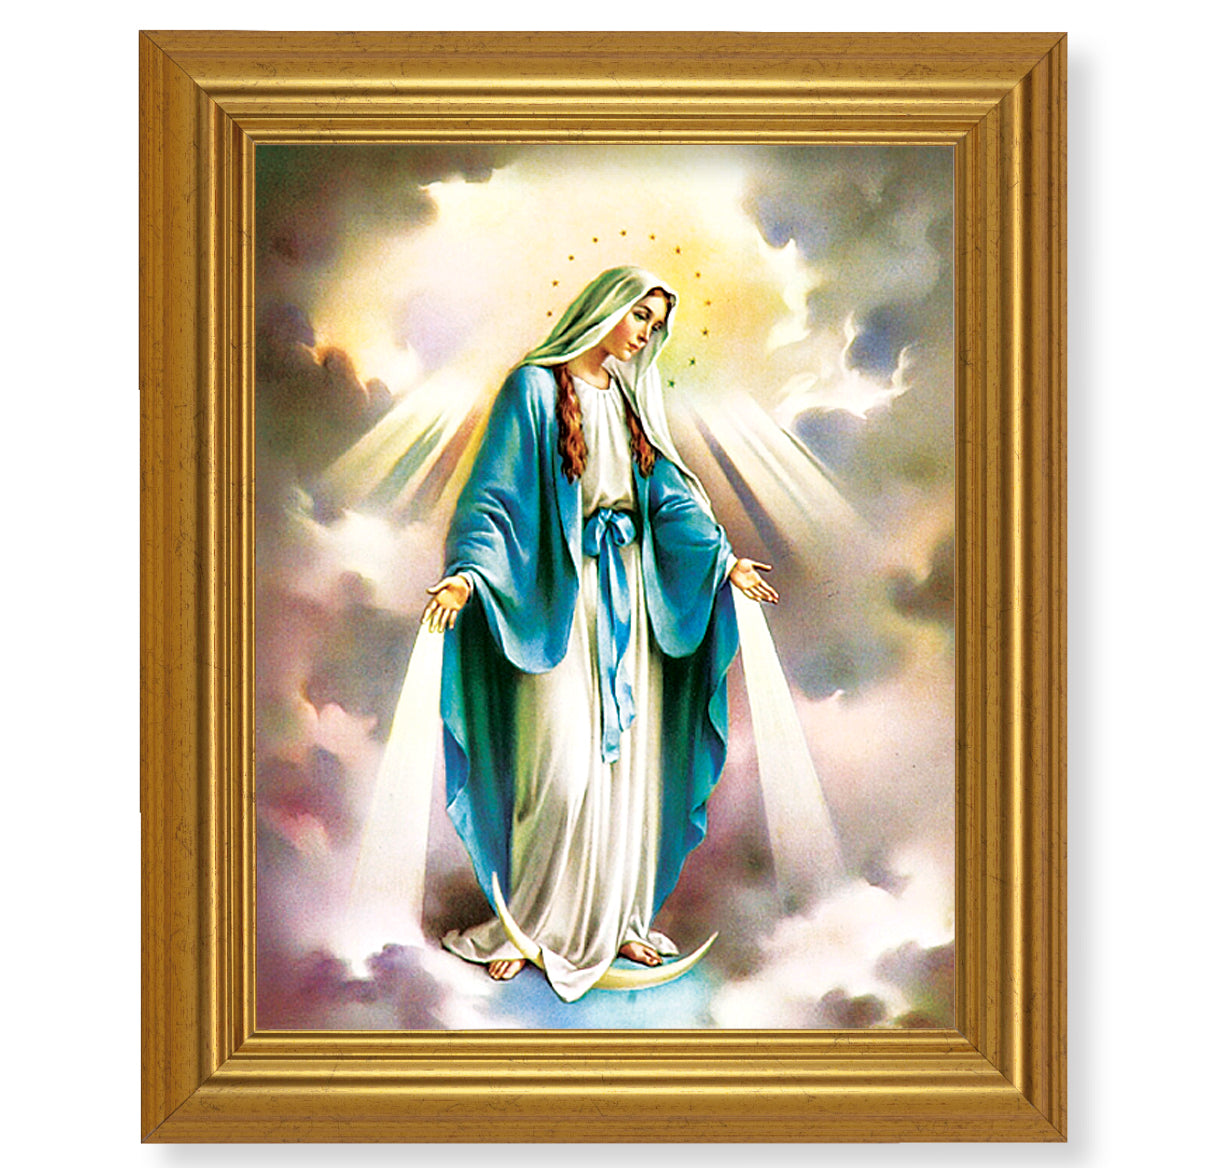 Our Lady of Grace Picture Framed Wall Art Decor, Large, Antique Gold-Leaf Classic Frame